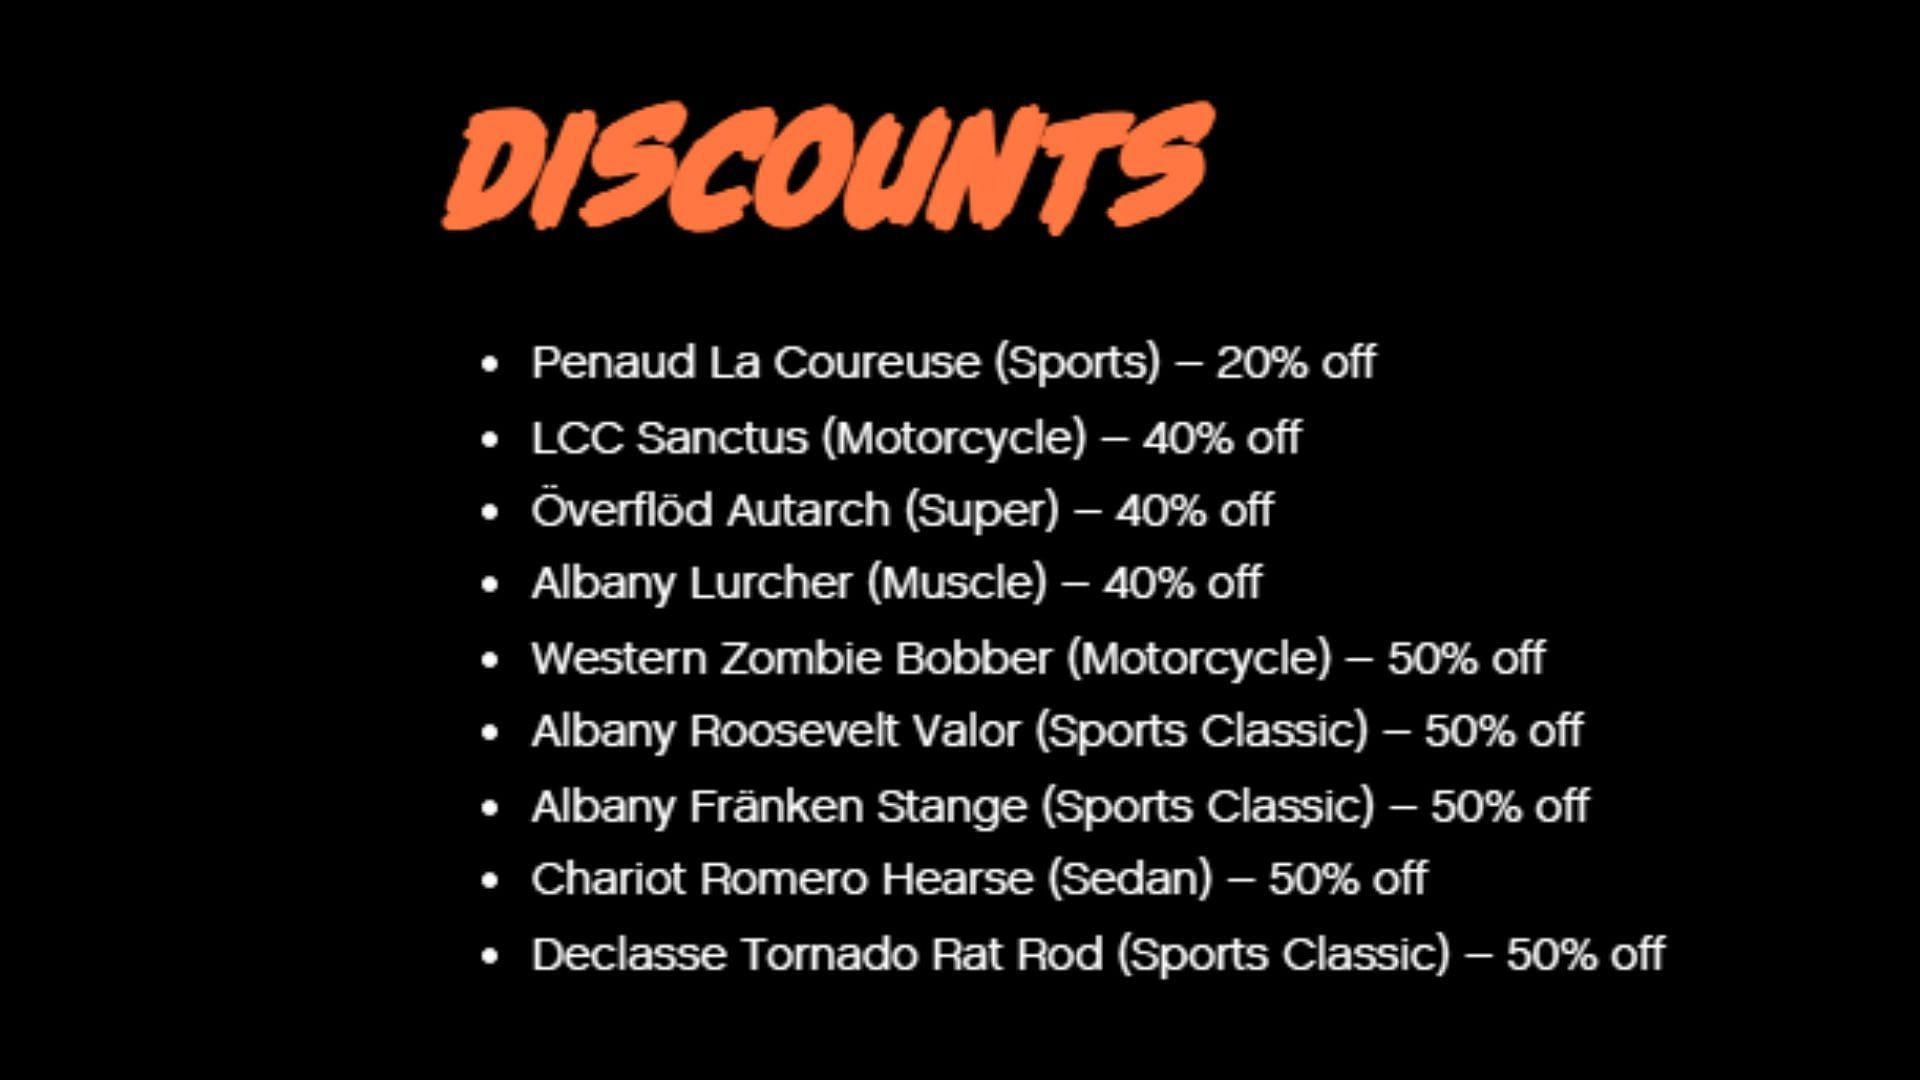 The Albany Lurcher is available at a discount this week (Image via Rockstar Games)